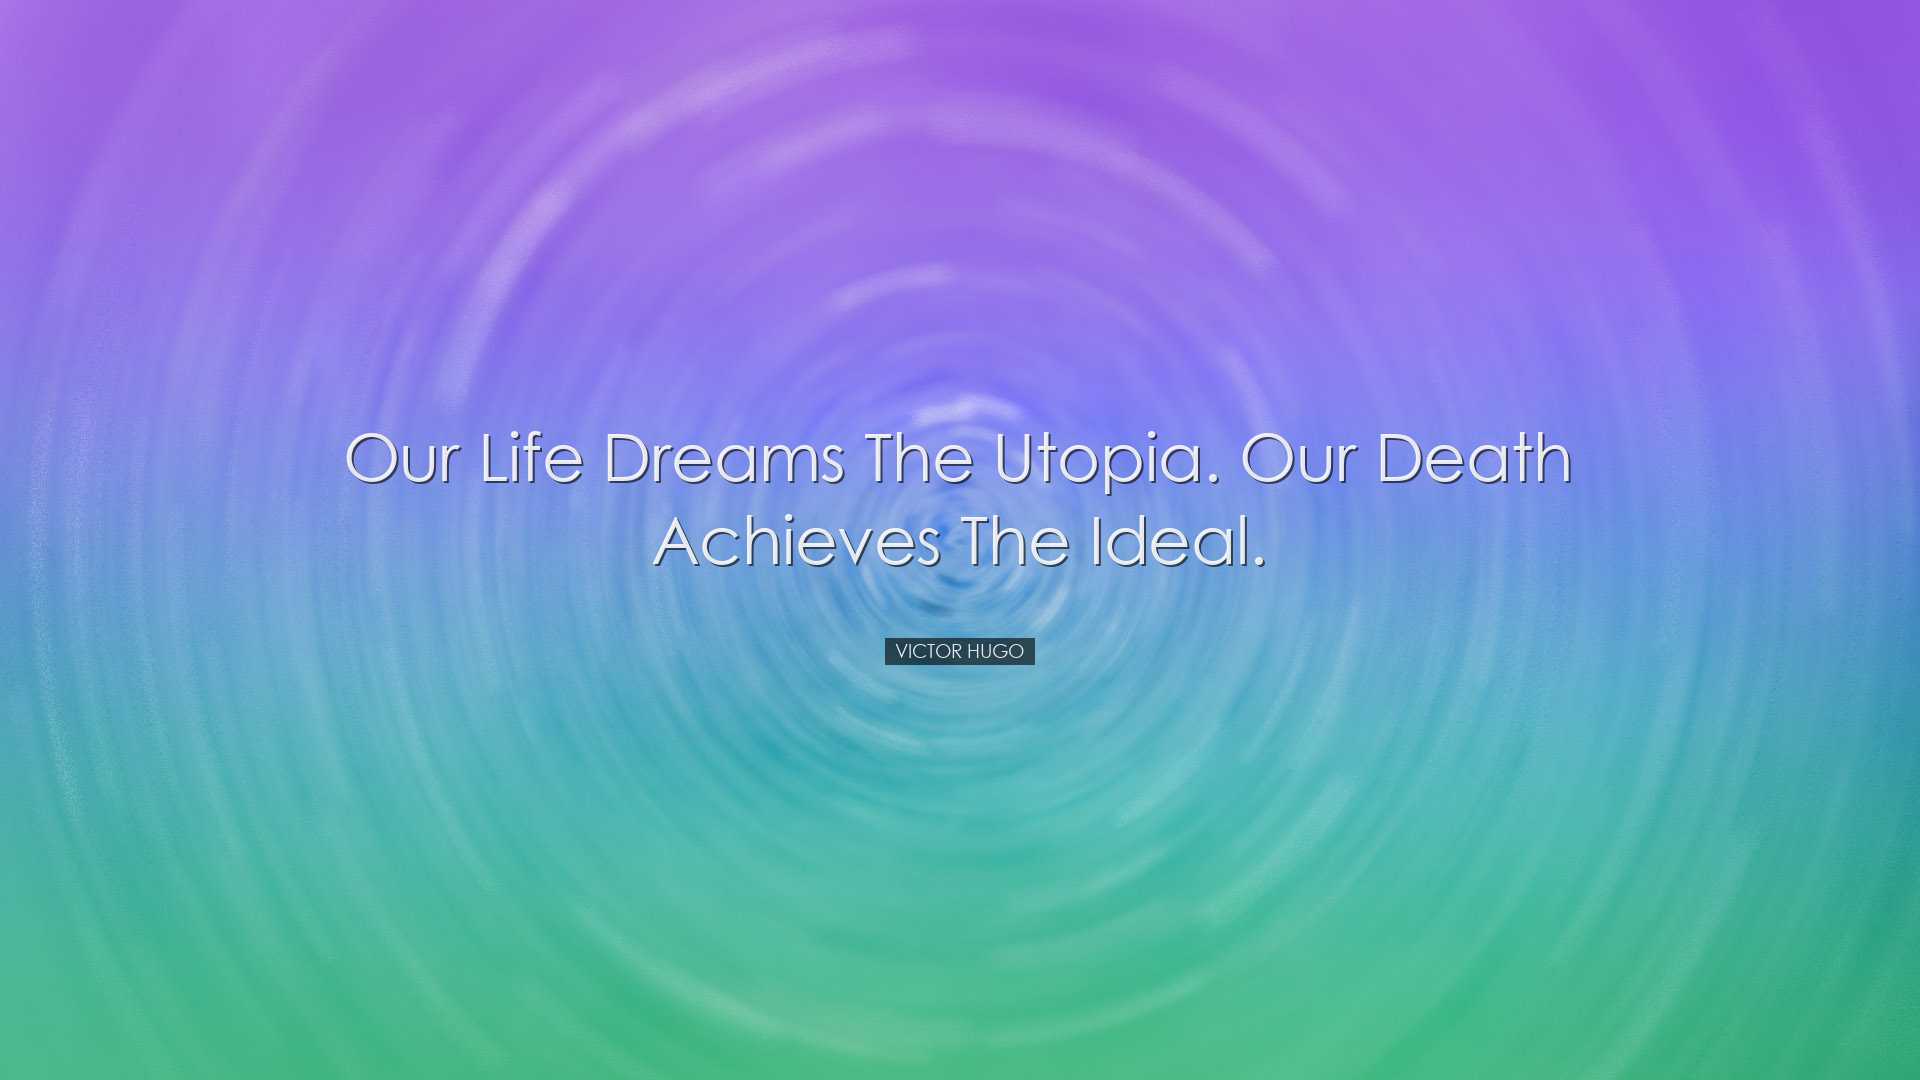 Our life dreams the Utopia. Our death achieves the Ideal. - Victor